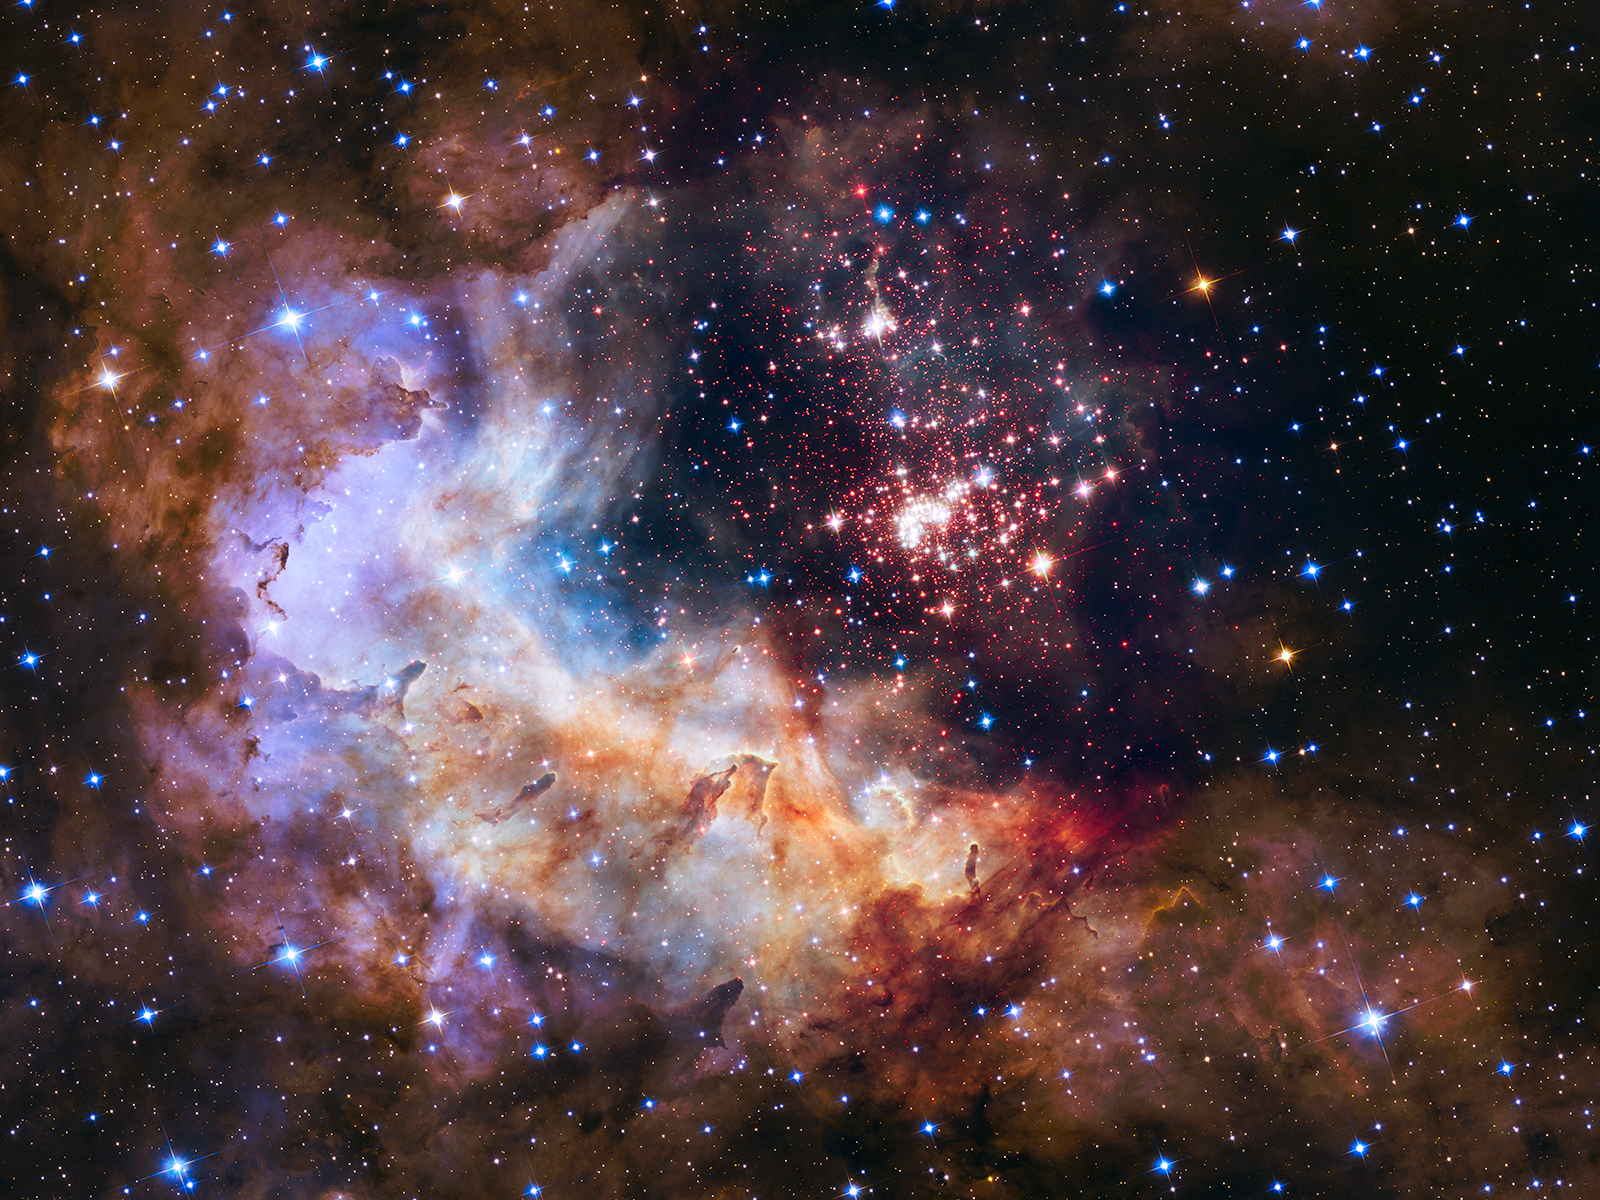 A dazzling cluster of bright stars is nestled within the hollow of a cavern of gas and dust visible in shades of orange, blue and white.